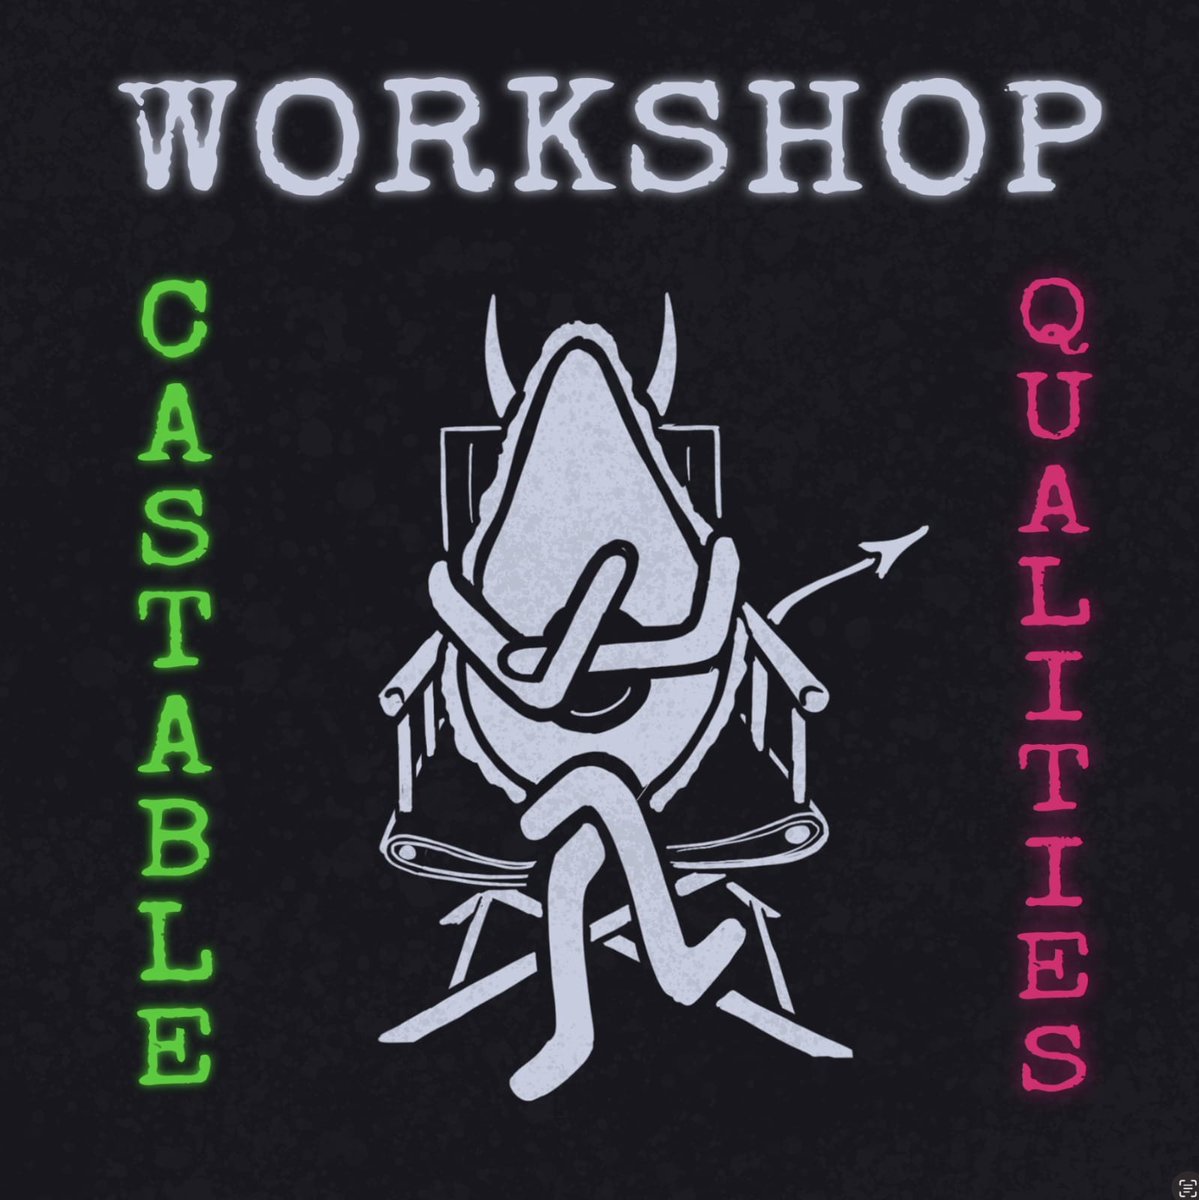 **SCREEN ACTING WORKSHOP** 🎥 Saturday 1st April, Liverpool, @artsbarstudios We are hosting our first drop in screen acting workshop focussed on 'Castable Qualities' 🎬 The workshop will be focused on dispelling the myth of 'Casting type' and providing practical skills (1/4)